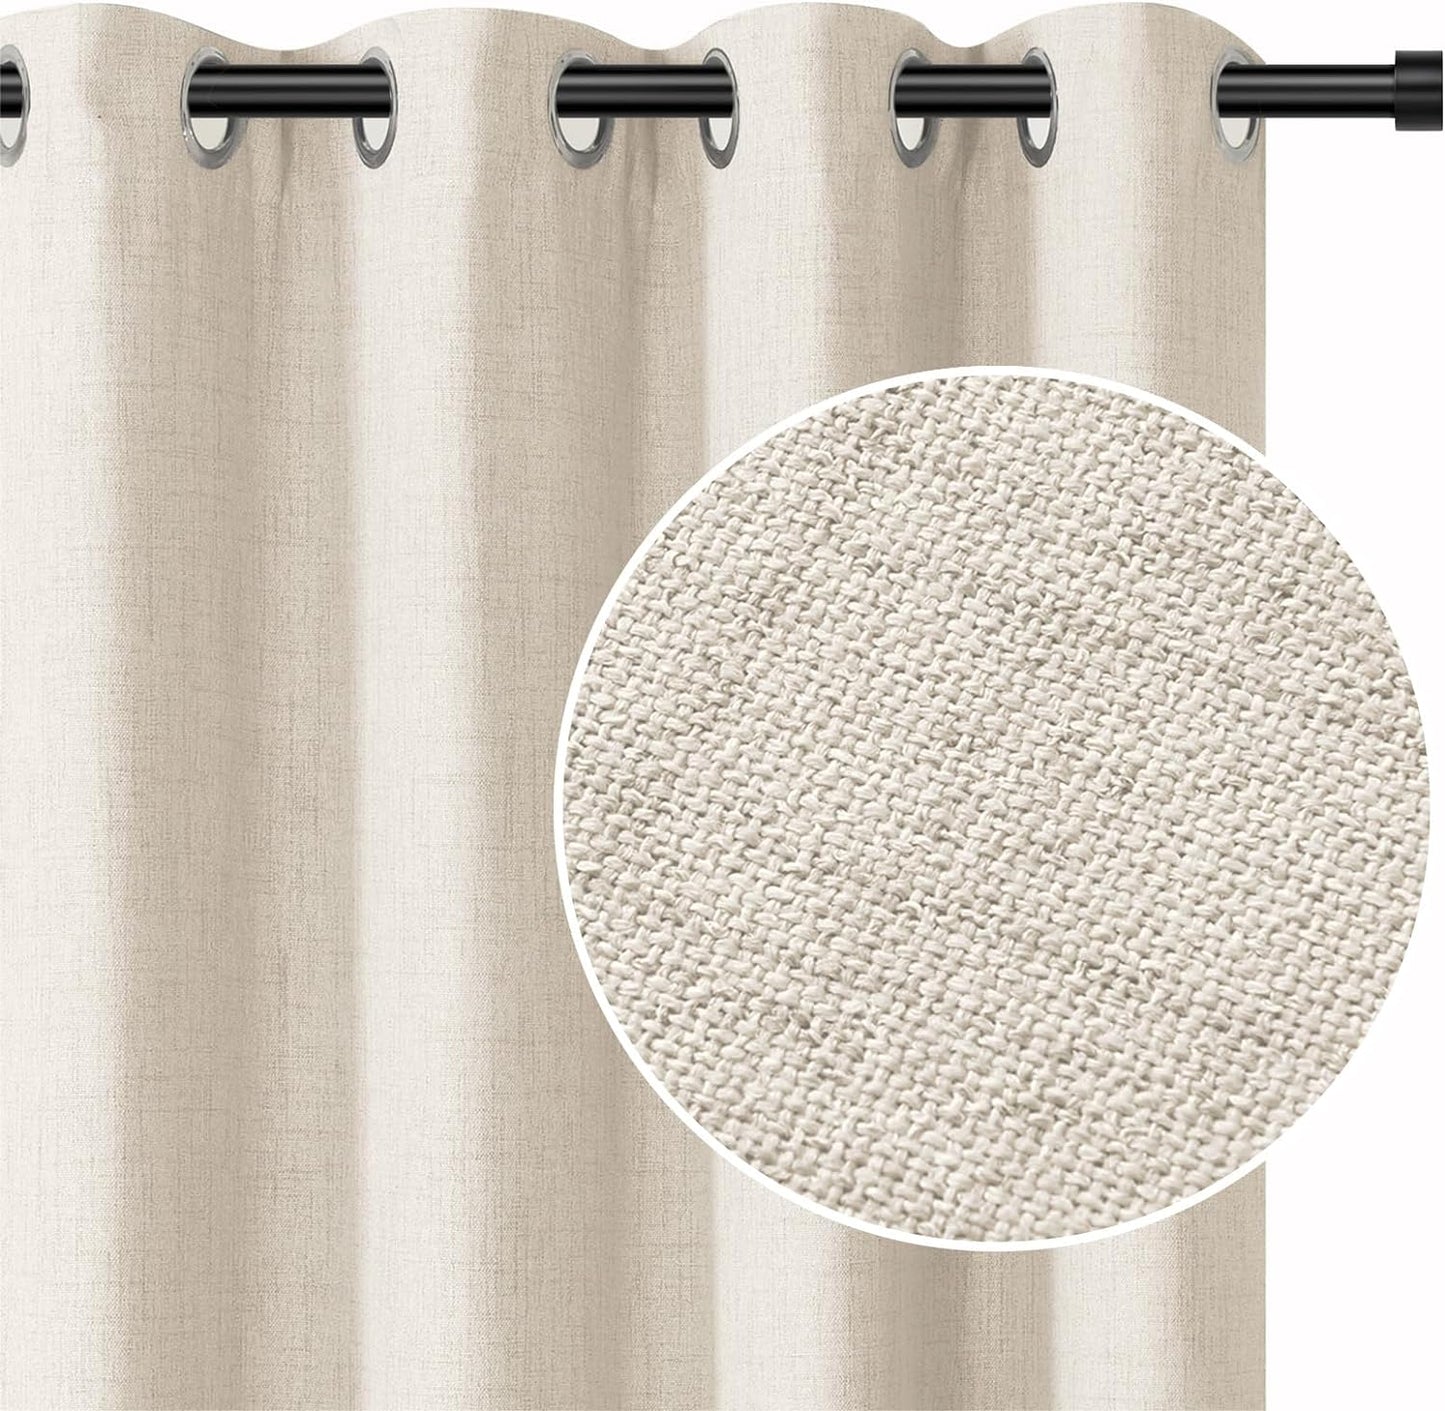 INOVADAY Blackout Curtains 63 Inch Length 2 Panels Set, Thermal Insulated Linen Blackout Curtains & Drapes Grommet Room Darkening Curtains for Bedroom Living Room- Dark Grey, W50 X L63  INOVADAY Cream 50"W X 96"L 